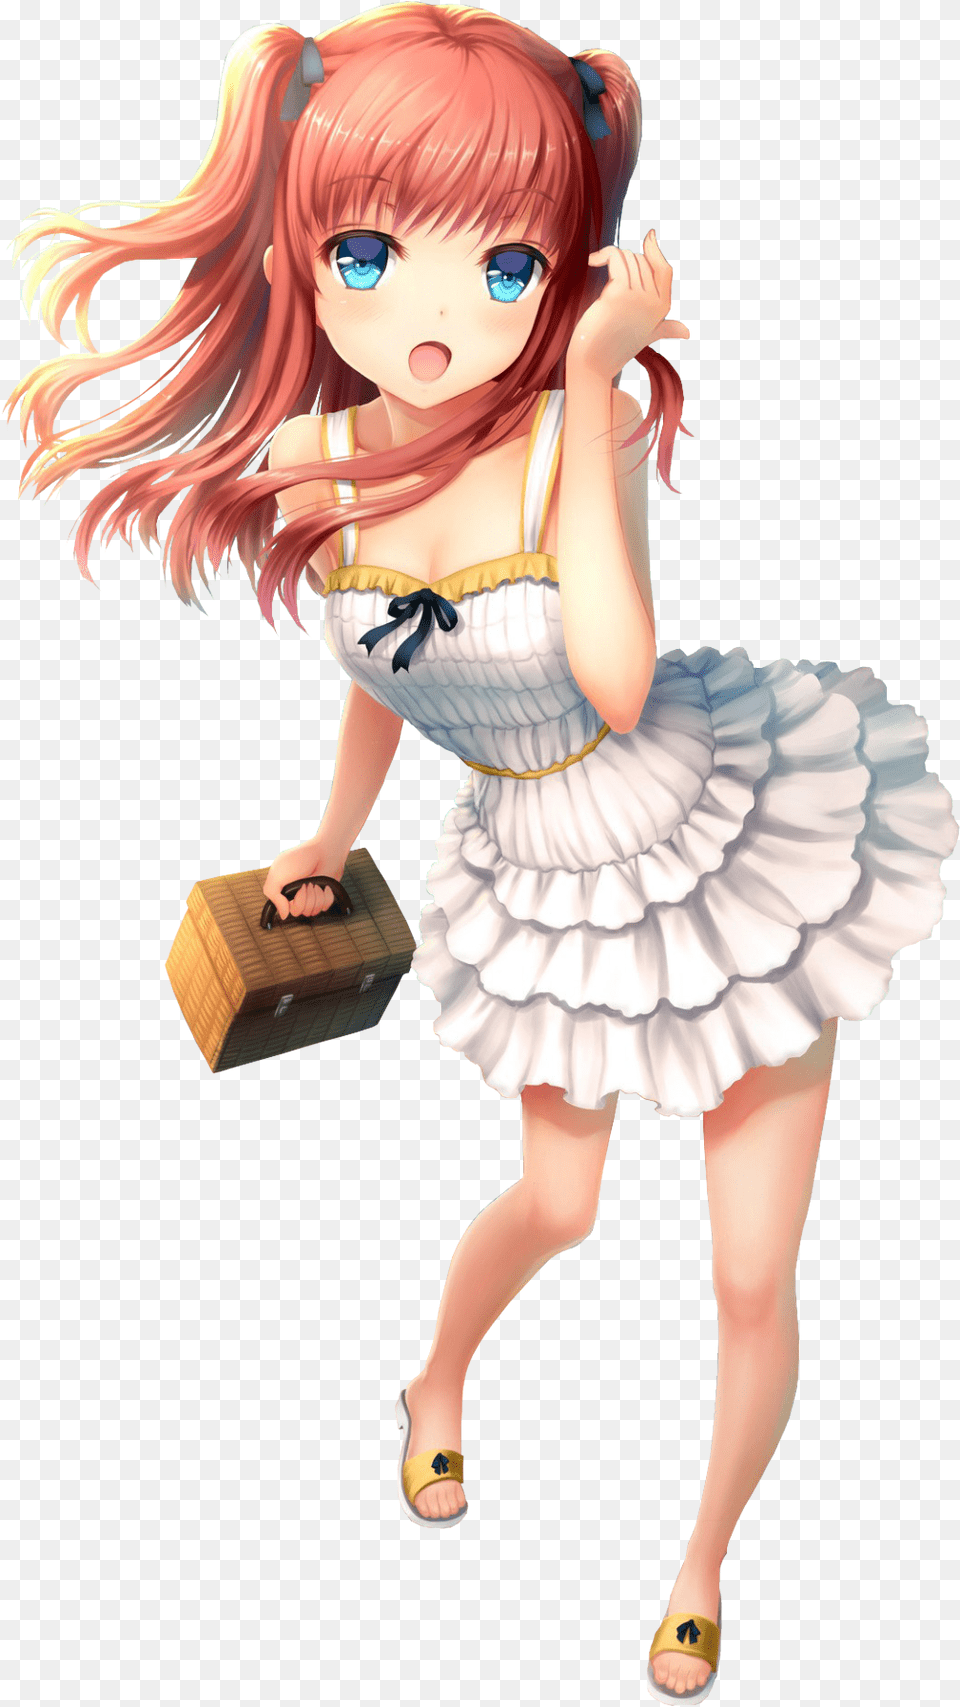 Girl Kawaii Cute Girls Anime Cute Anime Girl Transparent, Doll, Toy, Book, Publication Png Image